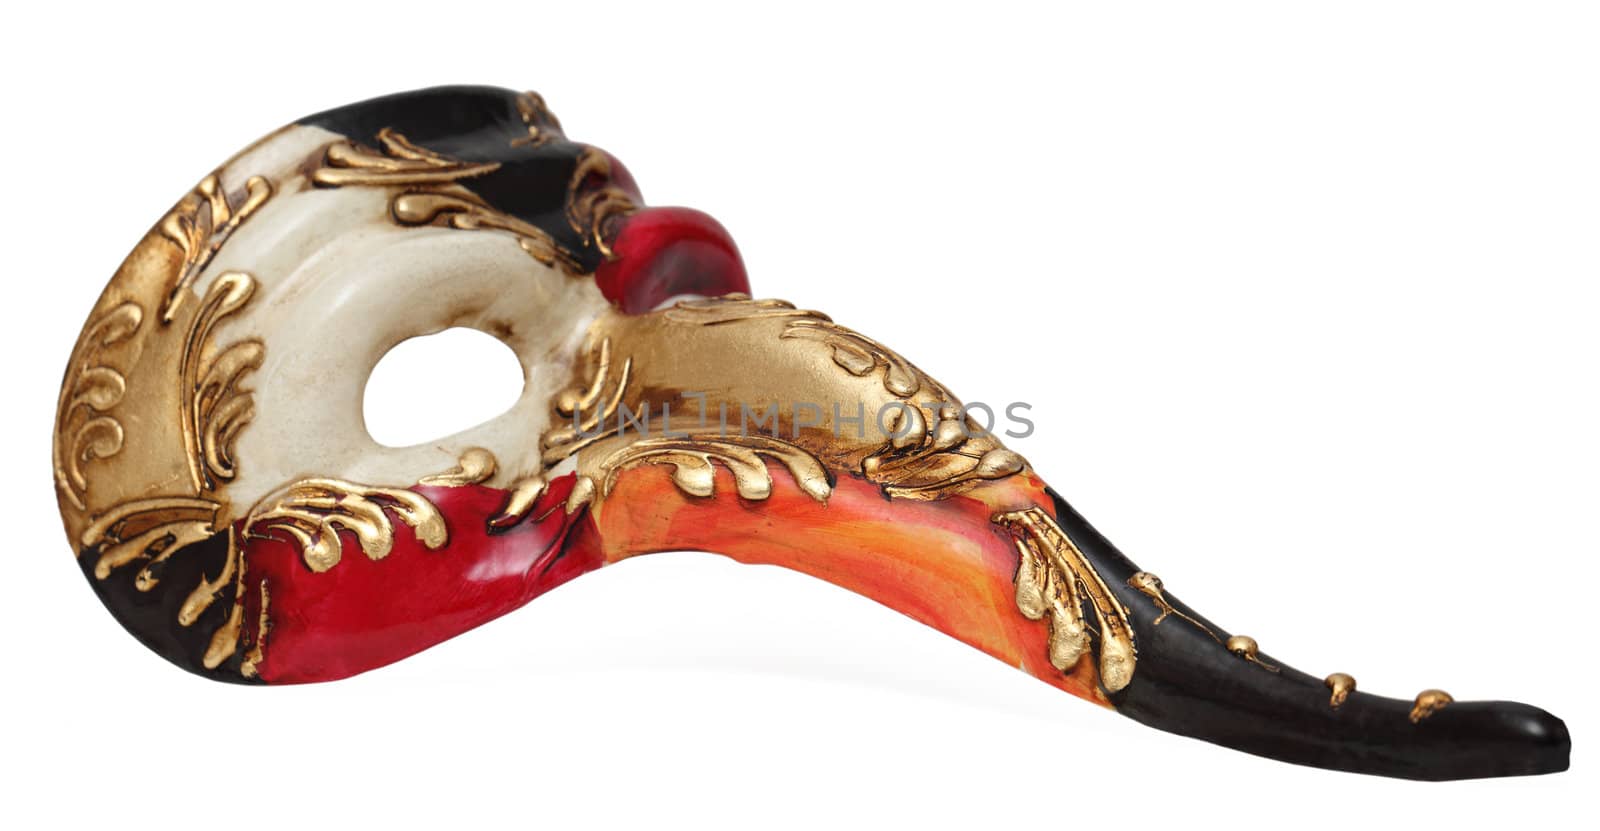 Image of a colorful long nose Venetian mask against a white background.